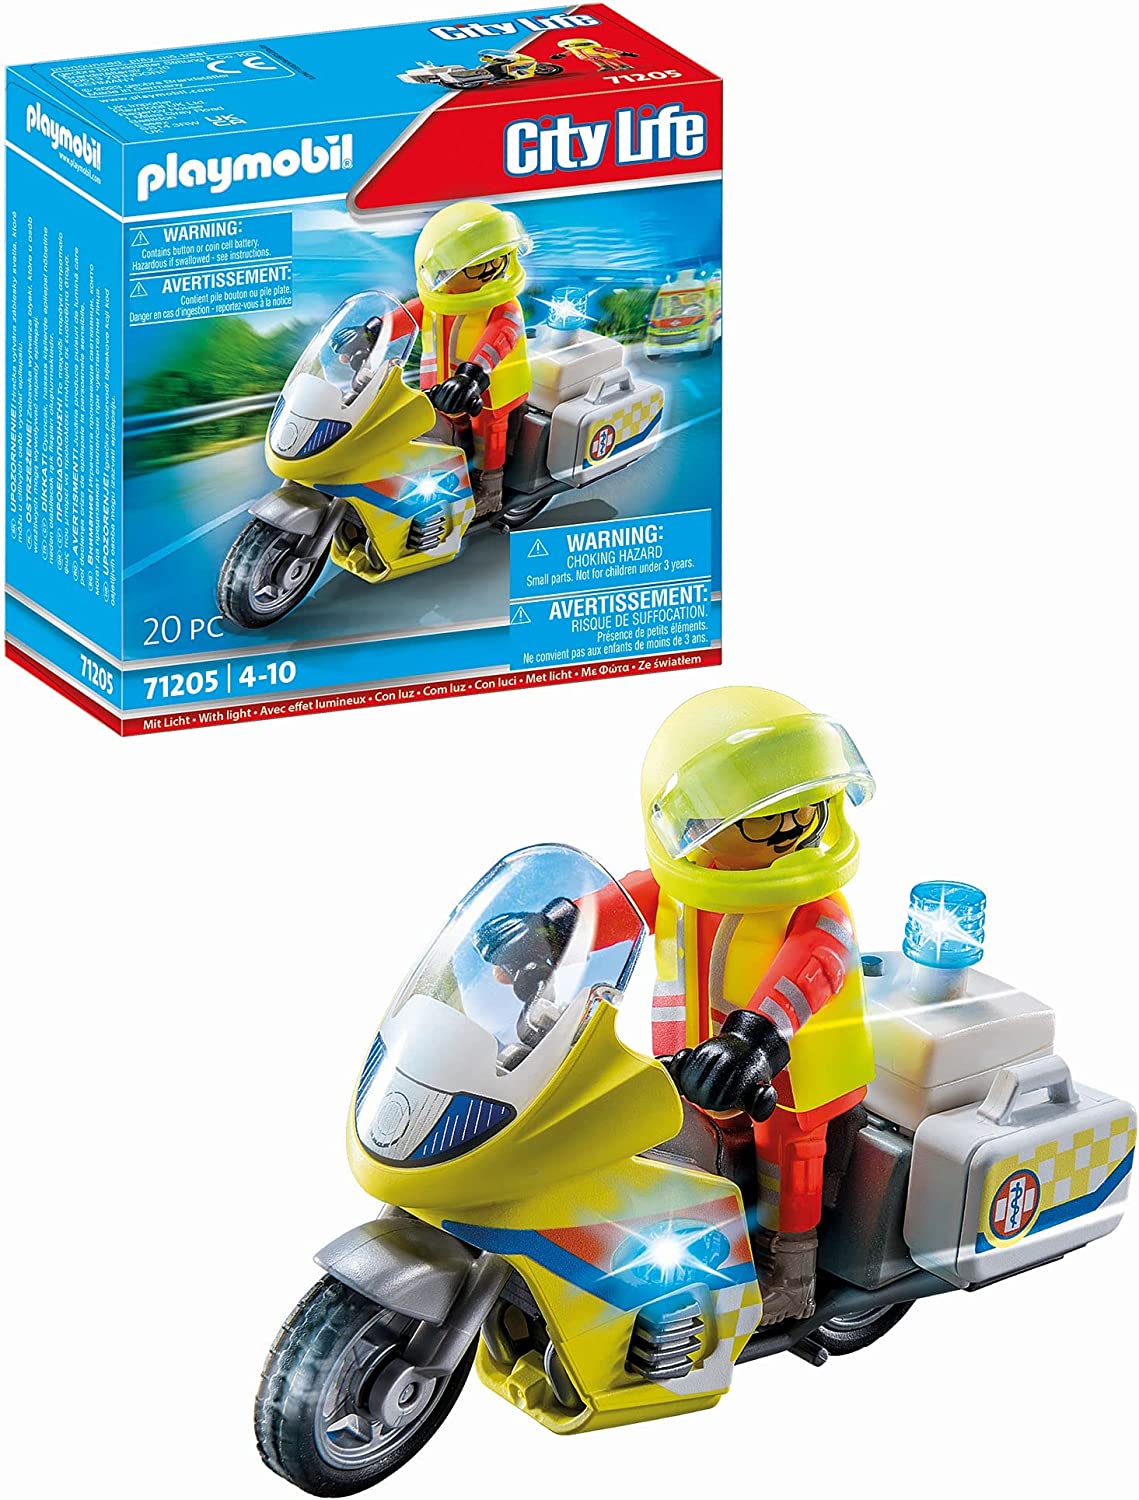 Playmobil City Life 71205 Emergency Doctor Motorcycle With Flashing Light, Toy for Children from 4 Years